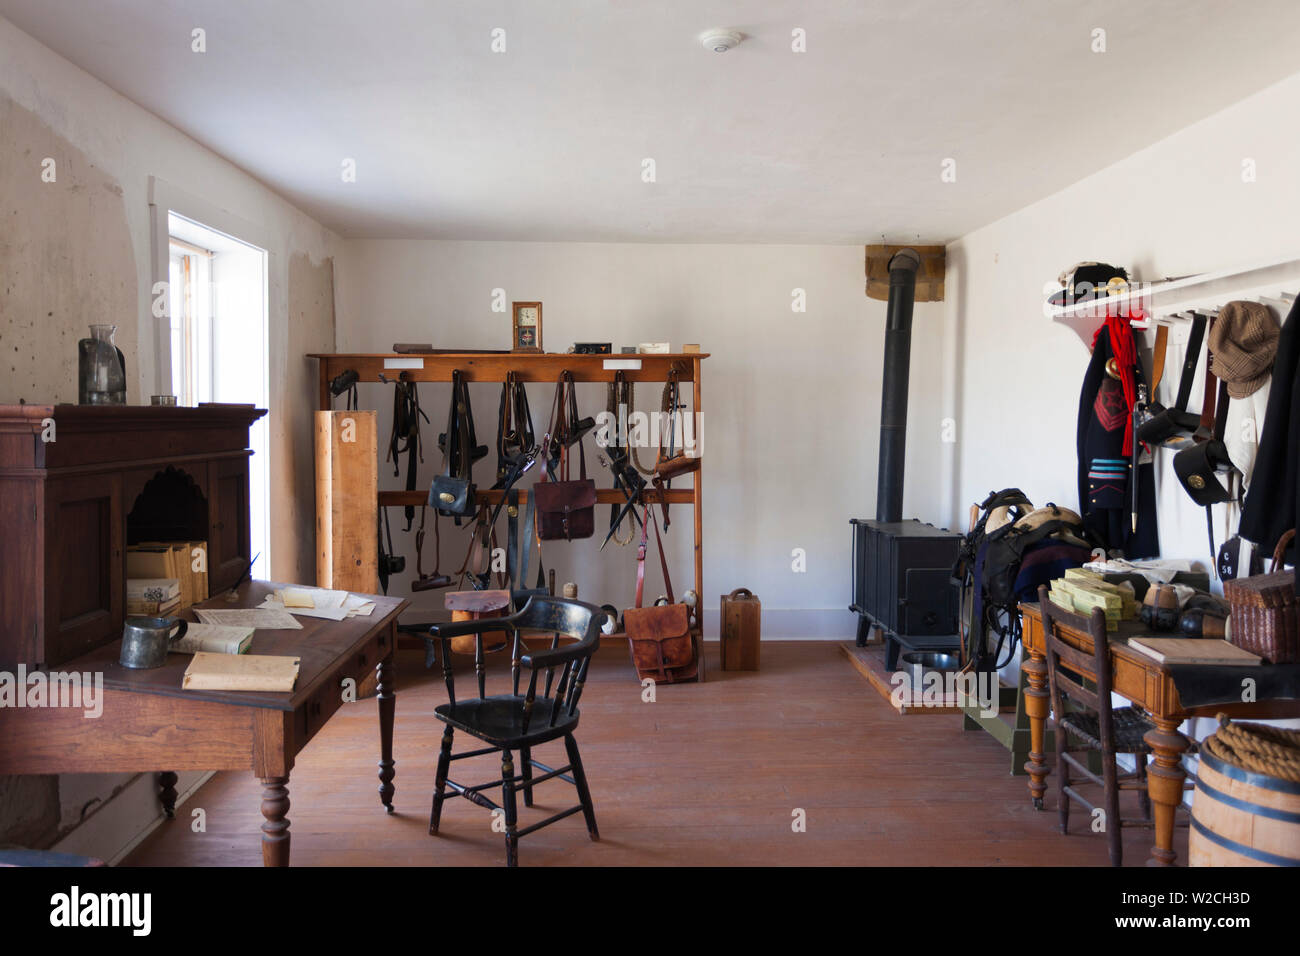 USA, Kansas, Larned, Fort Larned National Historic Site, mid-19th century military outpost, protecting the Santa Fe Trail, barracks interior Stock Photo